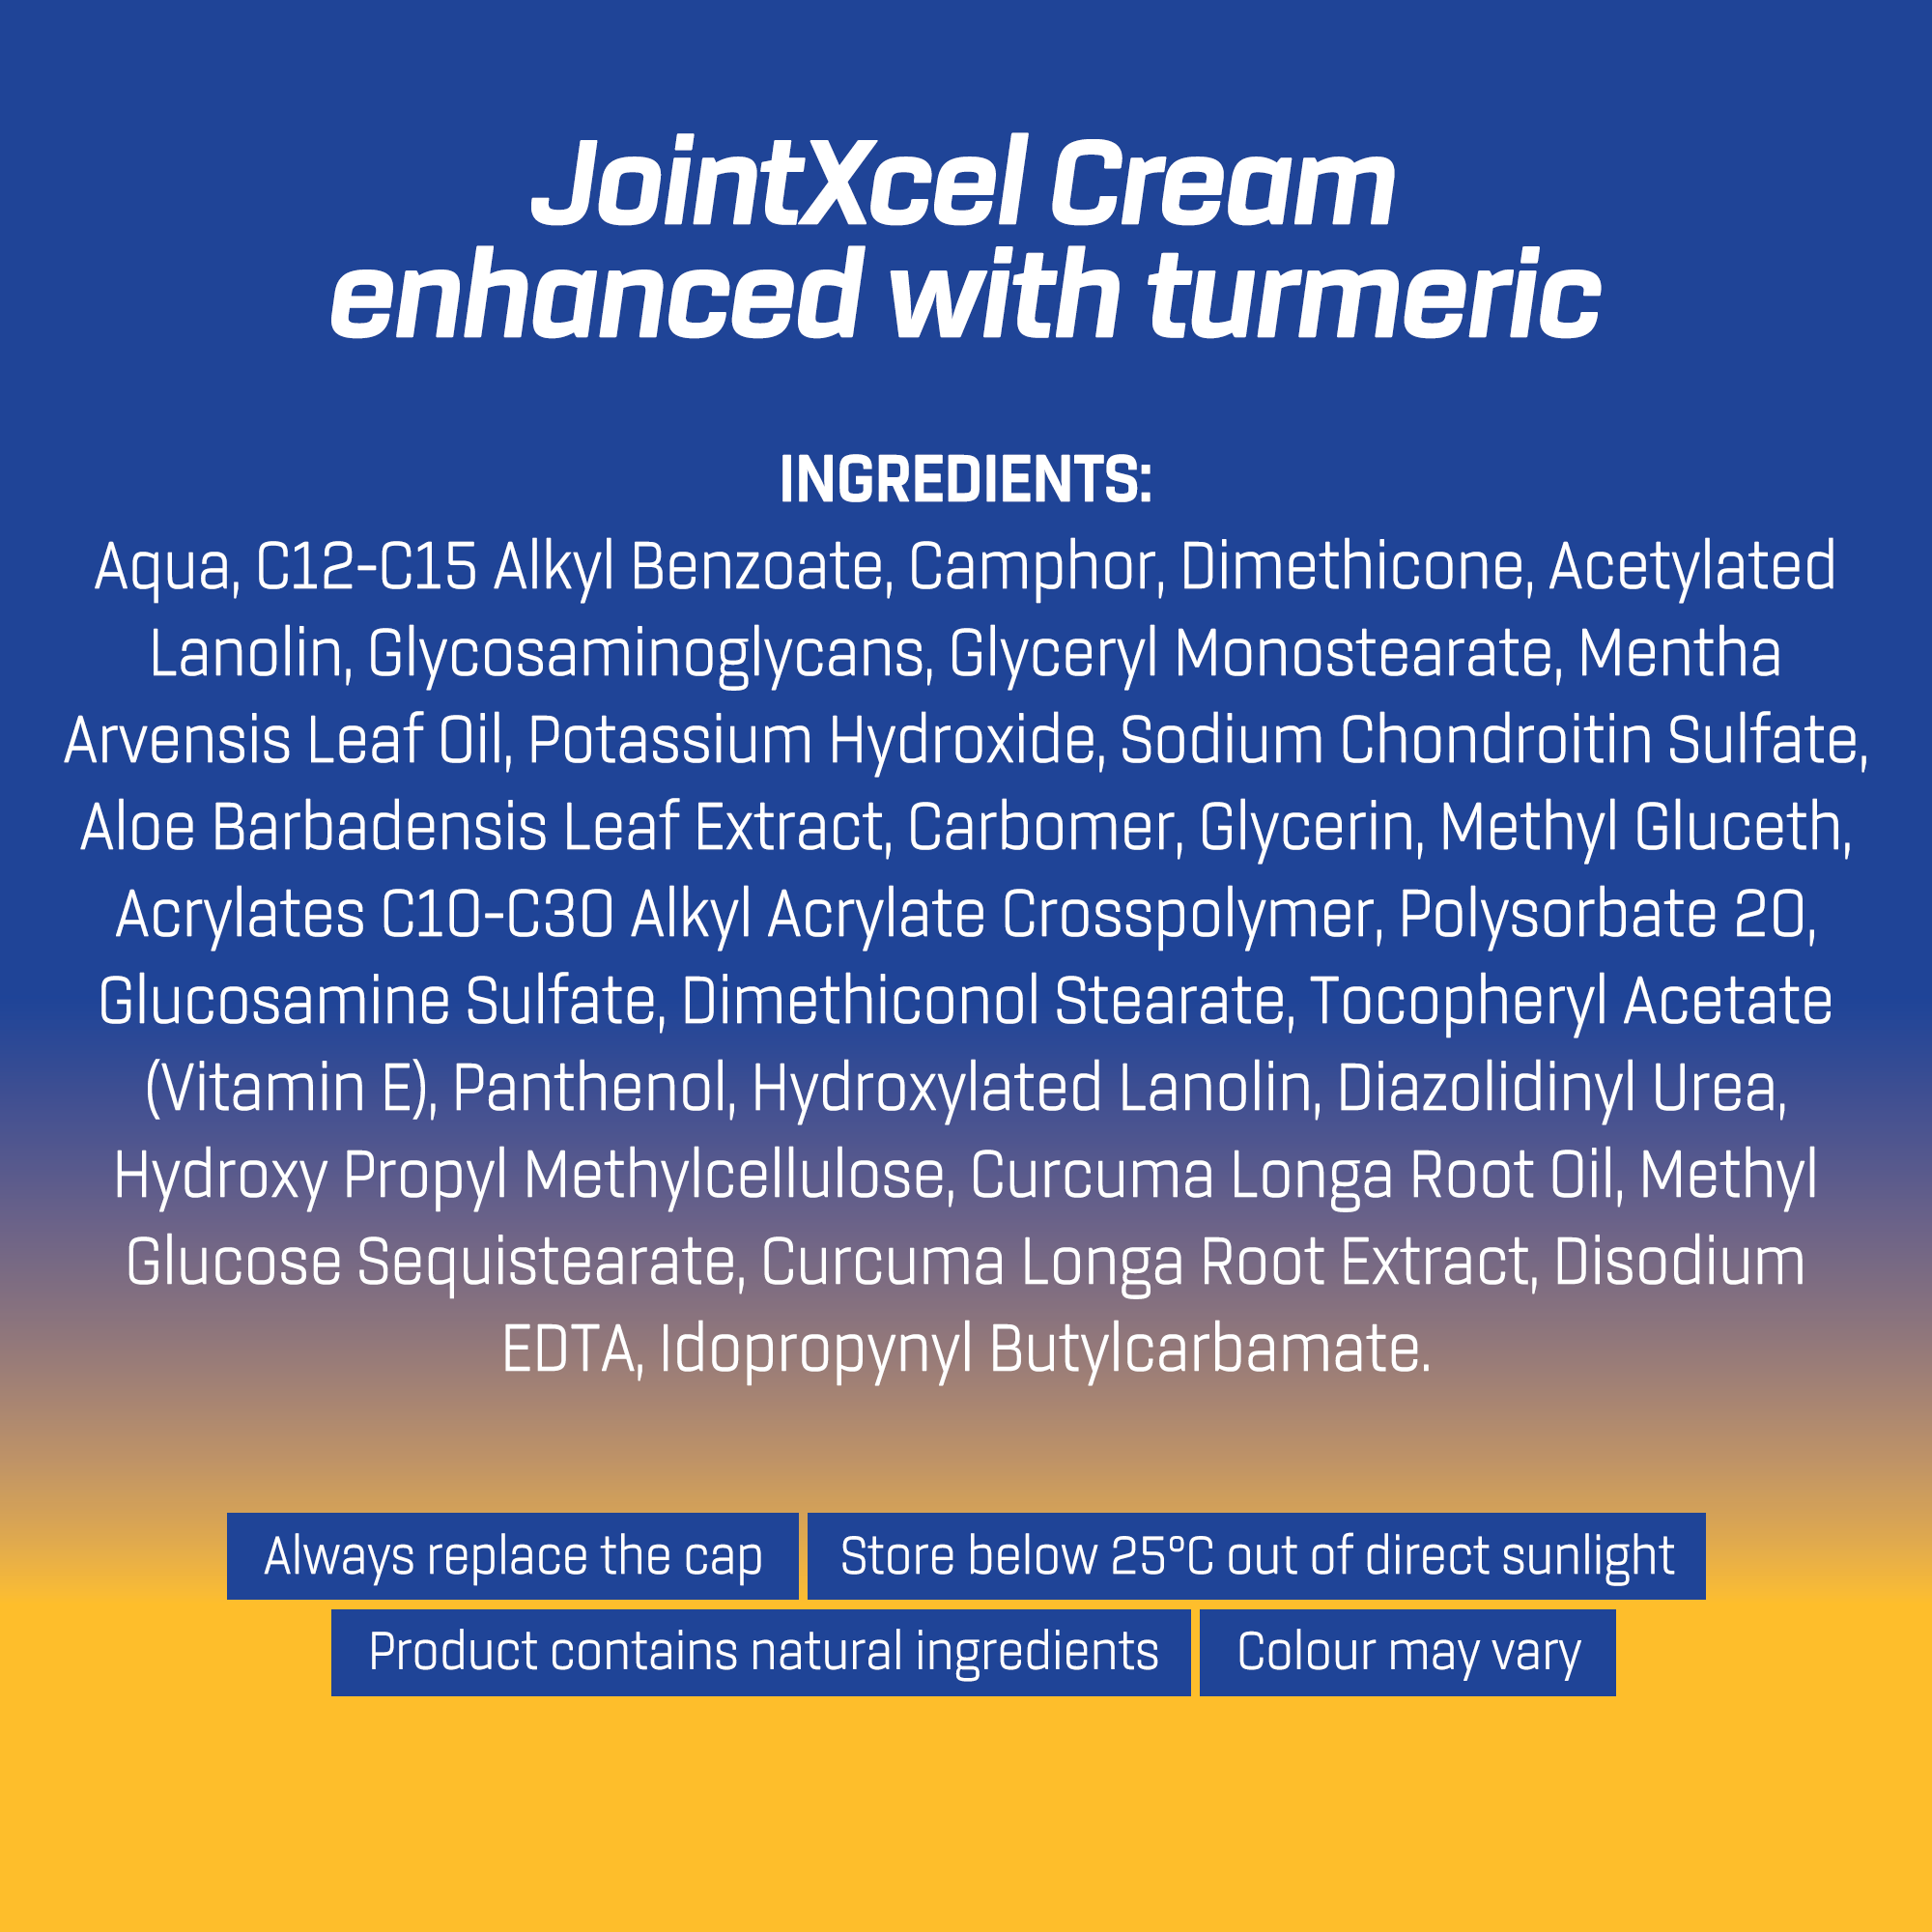 JointXcel® Joint Massage Cream With Turmeric 85g